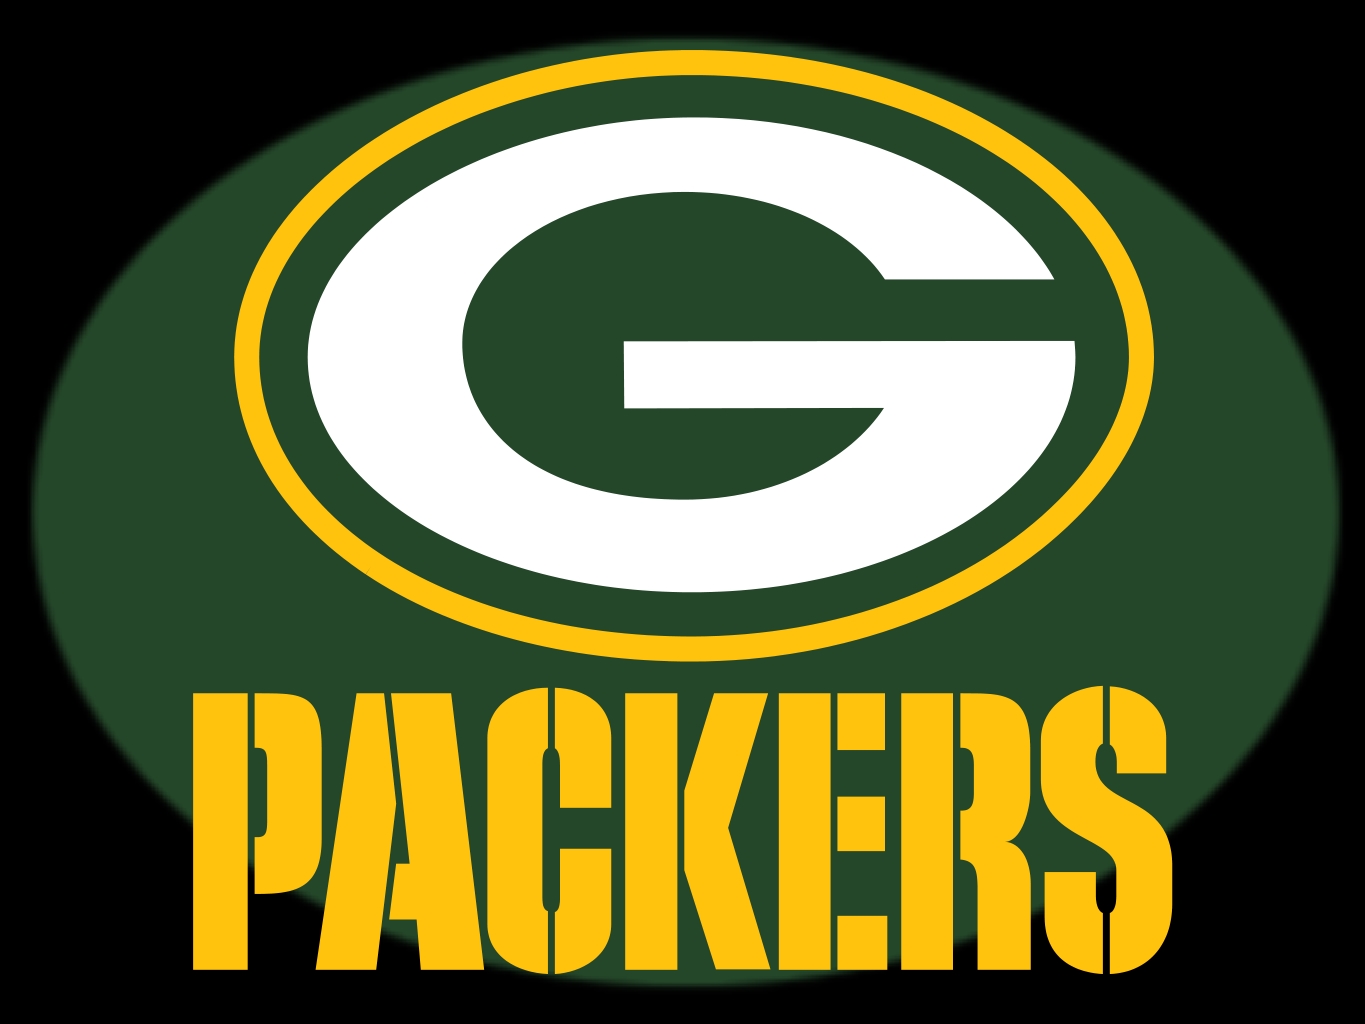 Pin Green Bay Packer Stencil Vector Download Vectors Page on Pinterest